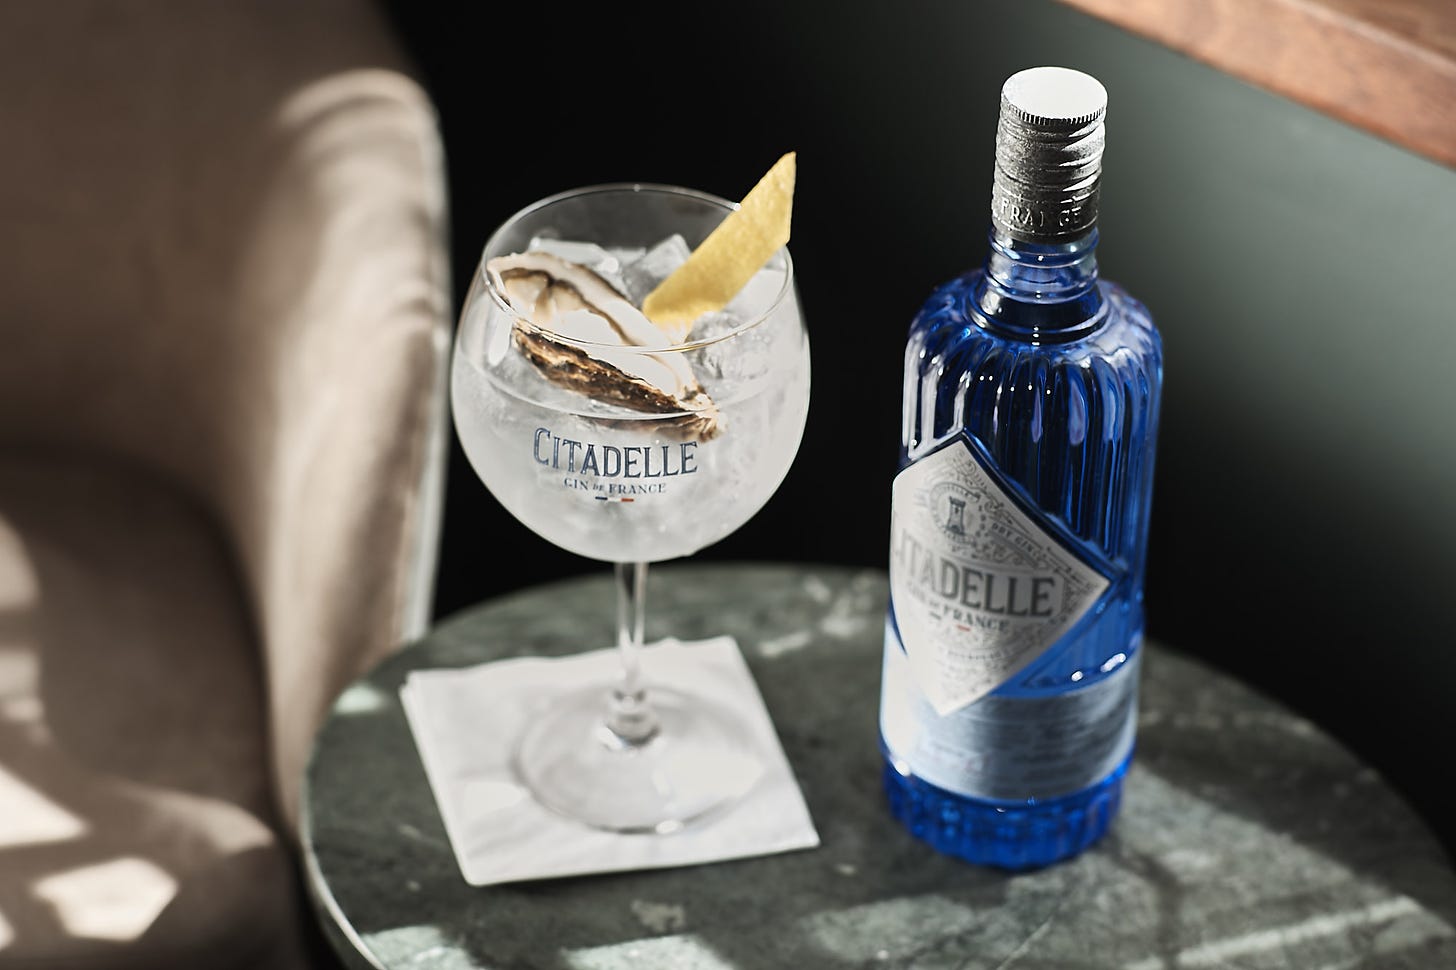 A small bottle of Citadelle gin on a table next to a glace with ice, a twist of lemon, and a single oyster. The color palette is muted grays and pewters, but the gin bottle is a light clear ceylon blue.